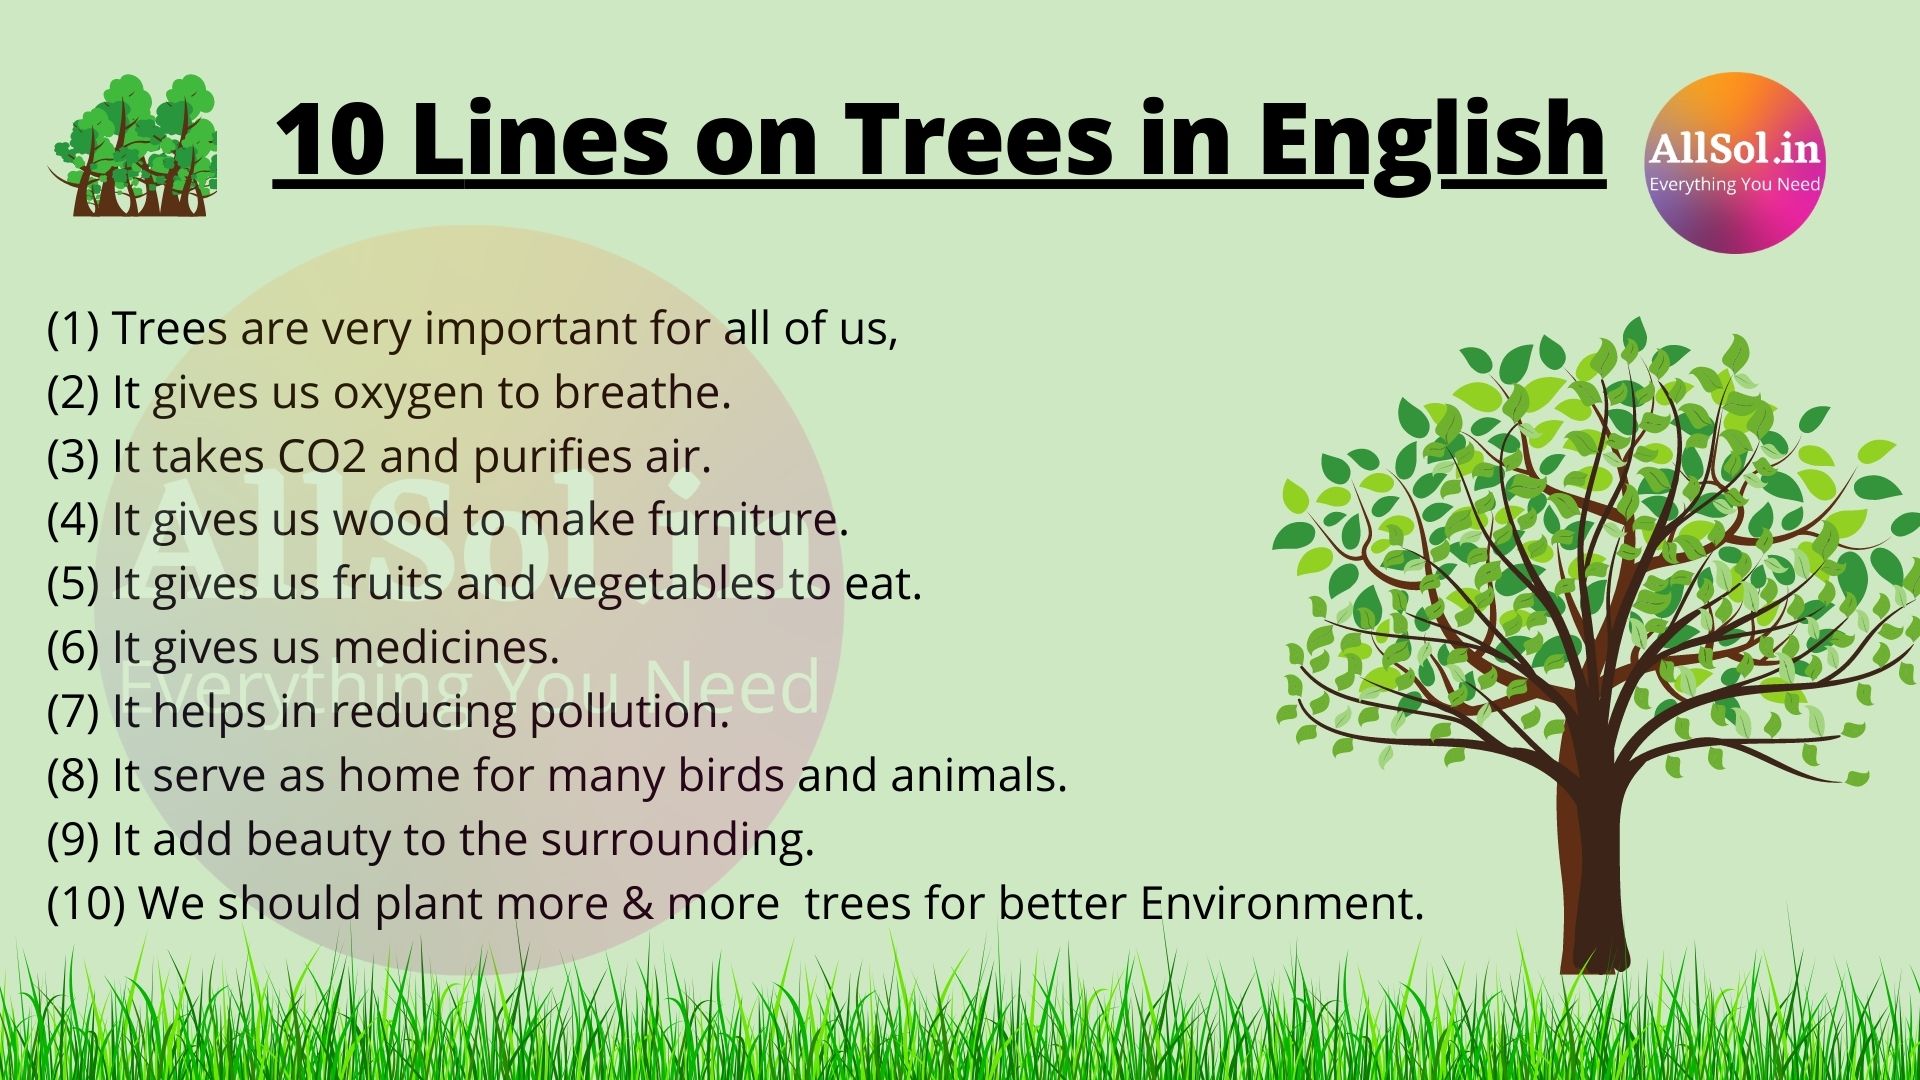 Lines on Trees in English